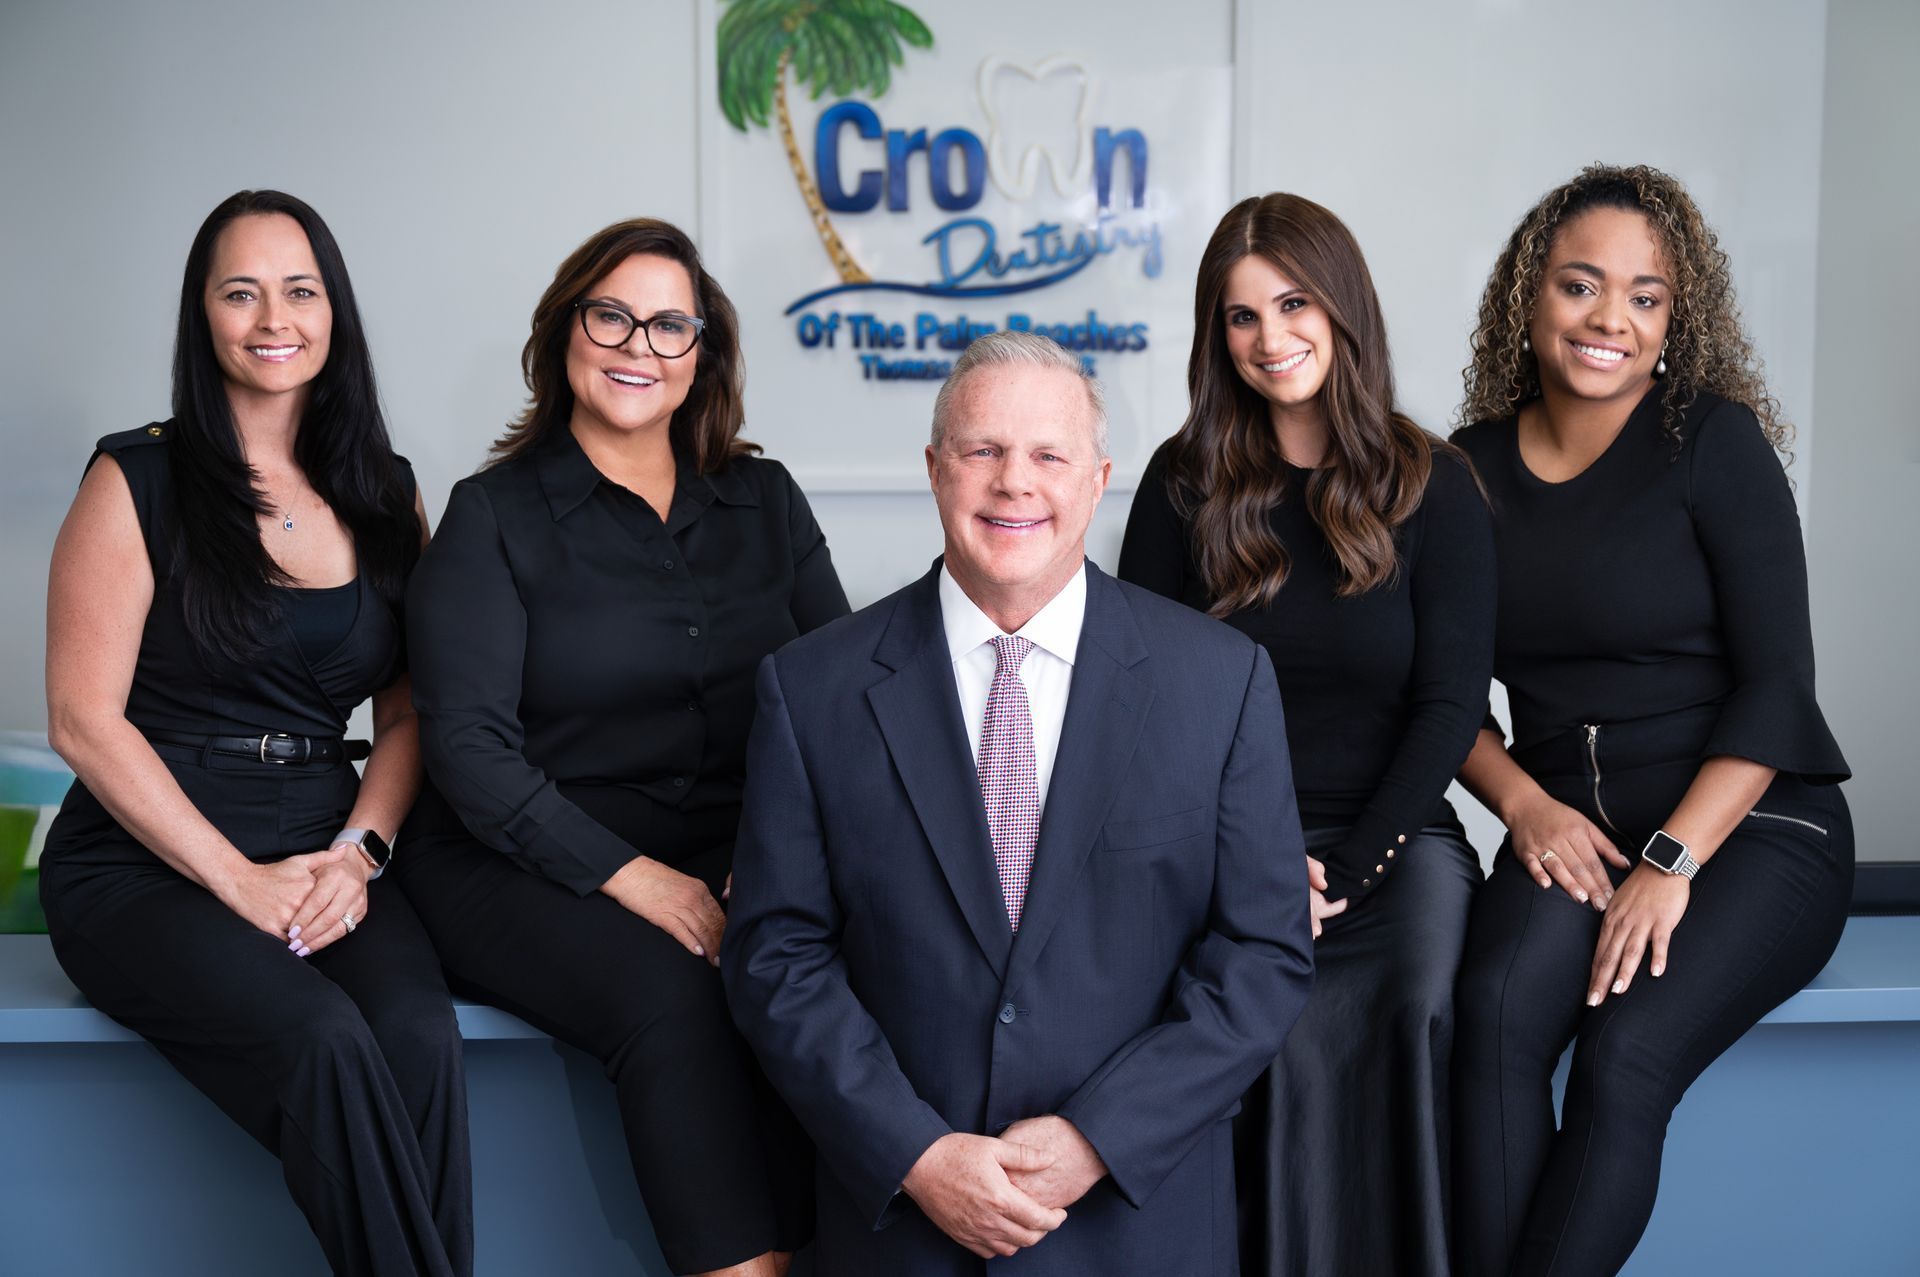 team photo of Crown Dentistry of the Palm Beaches